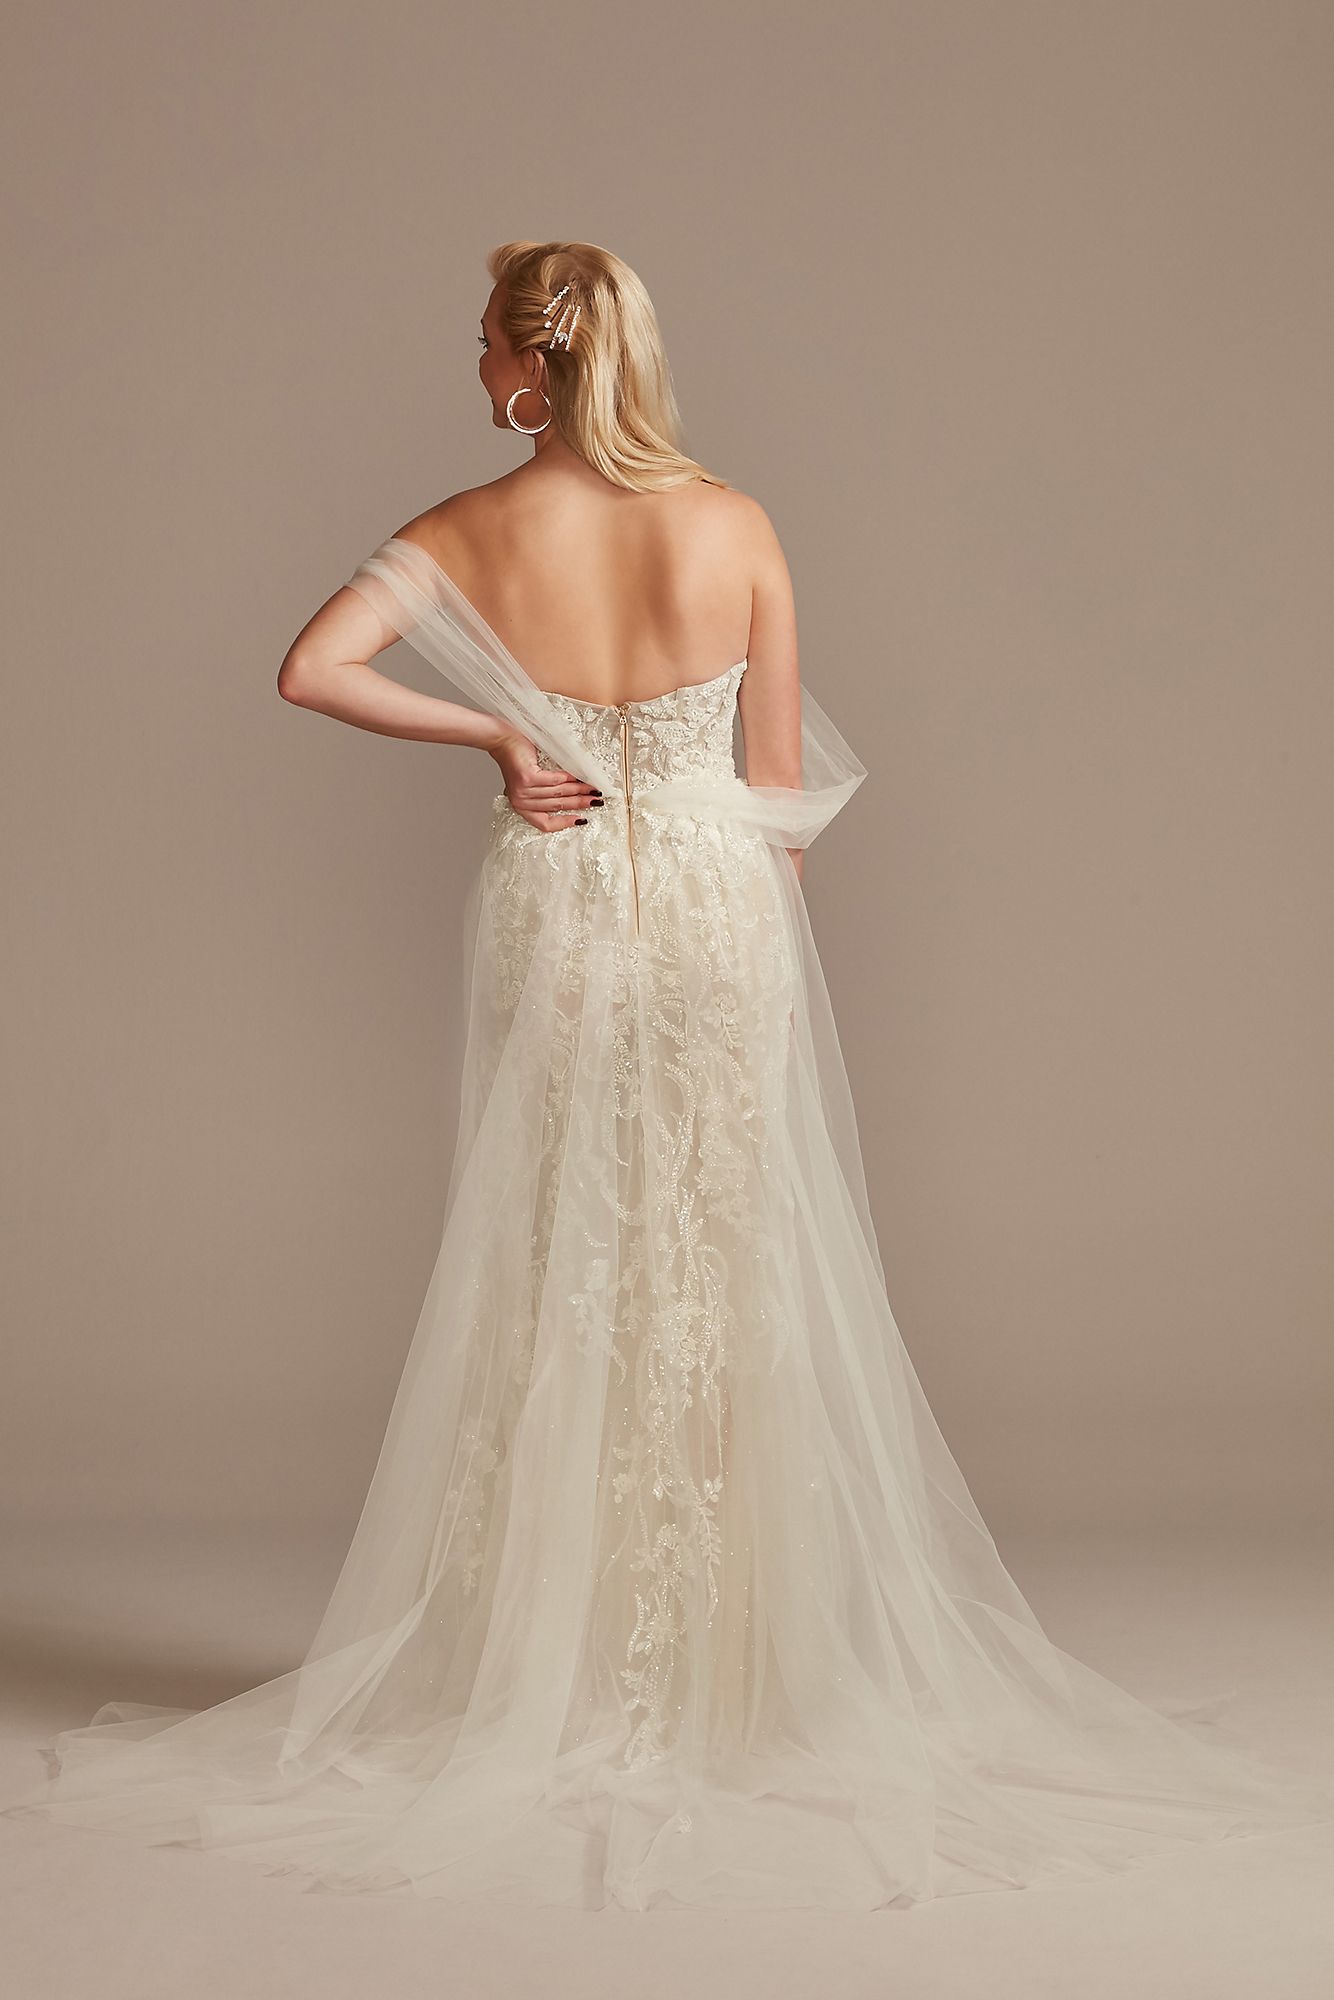 Removable Sleeves and Train Bodysuit Wedding Dress Galina Signature MBSWG881